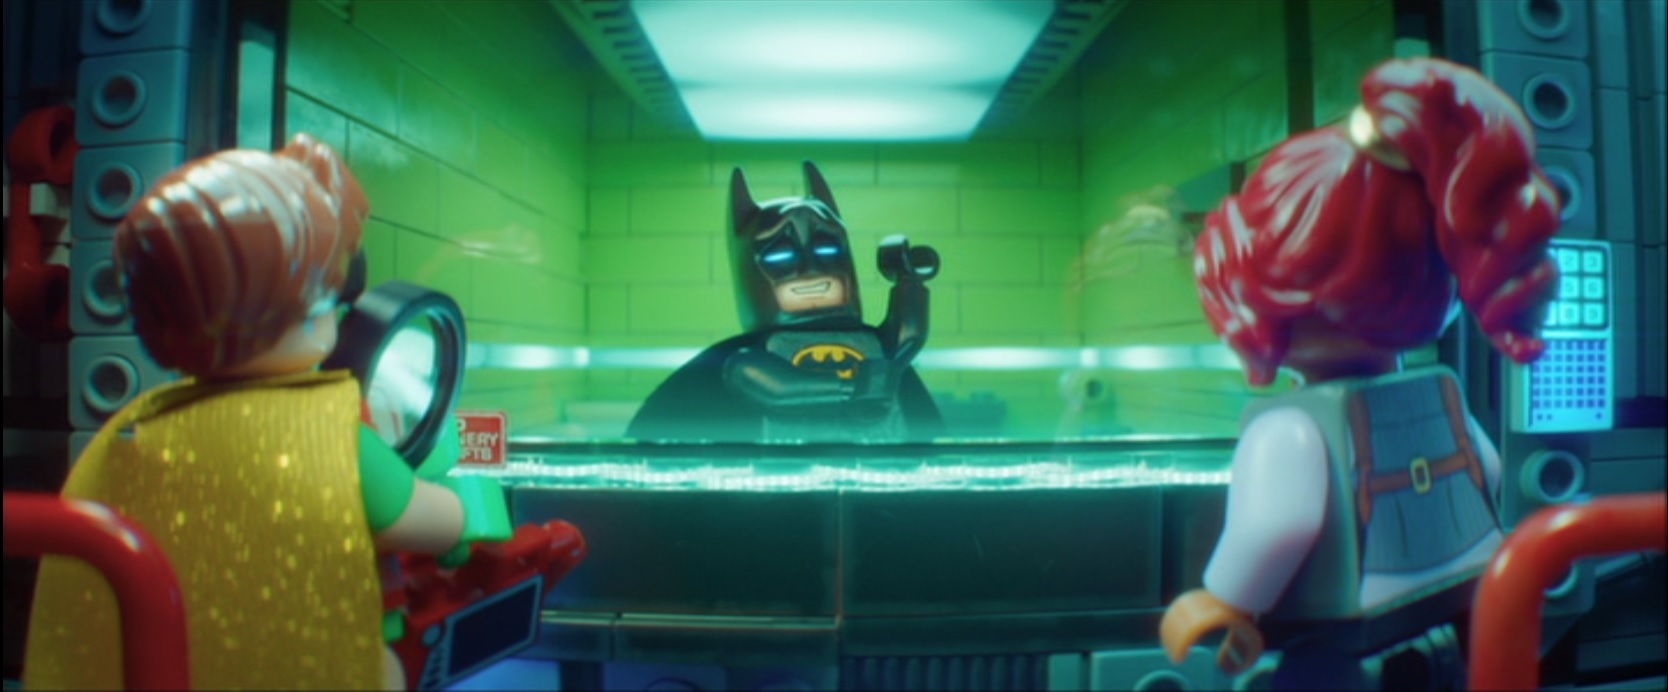 The Lego Batman Movie | Dr. Grob's Animation Review